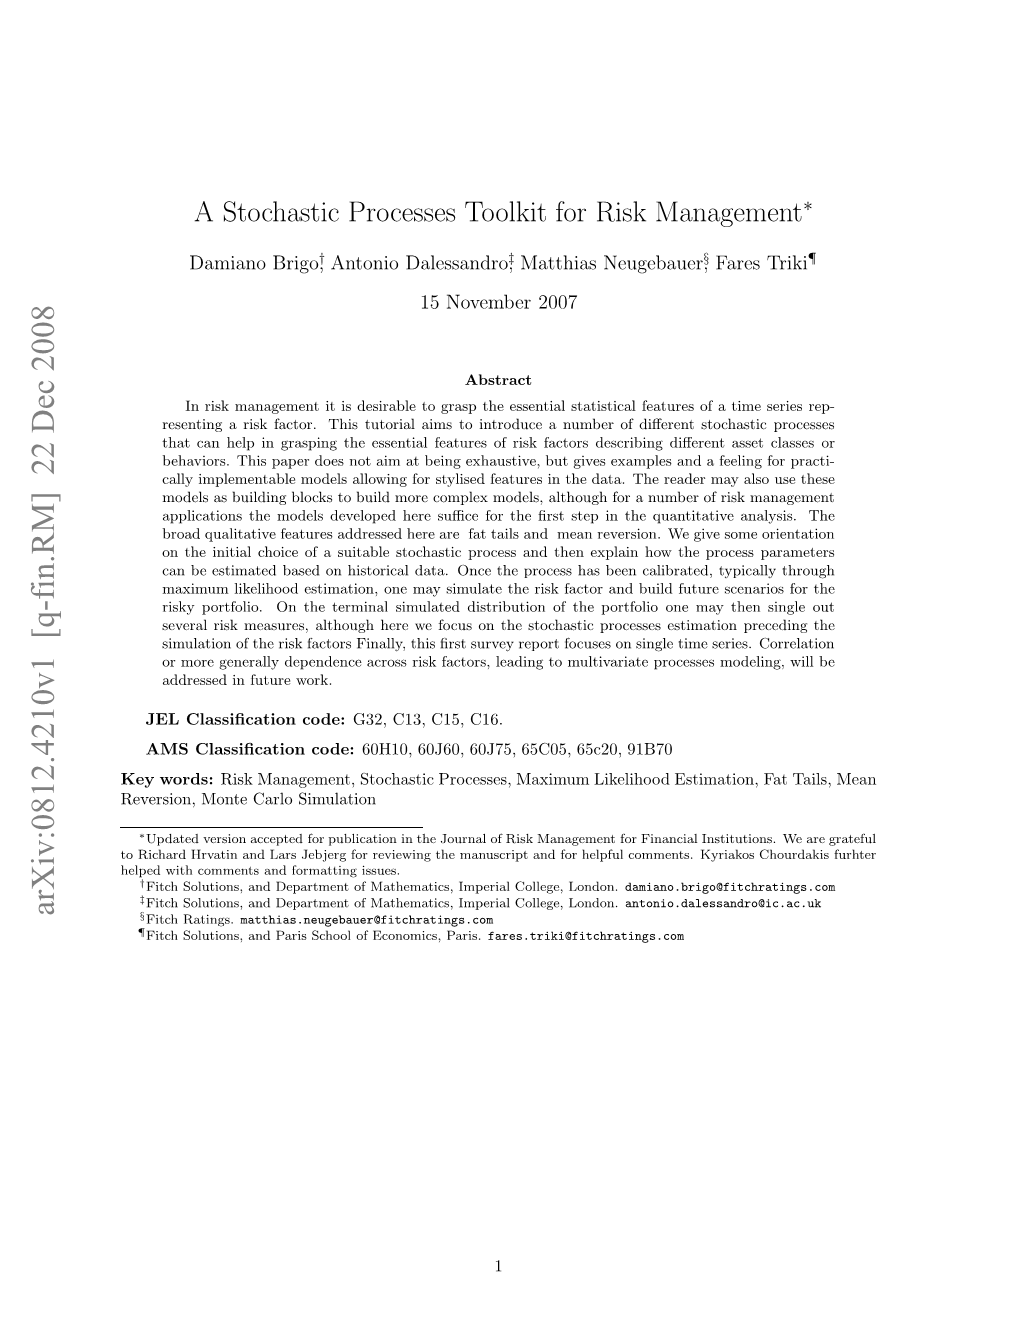 A Stochastic Processes Toolkit for Risk Management 3